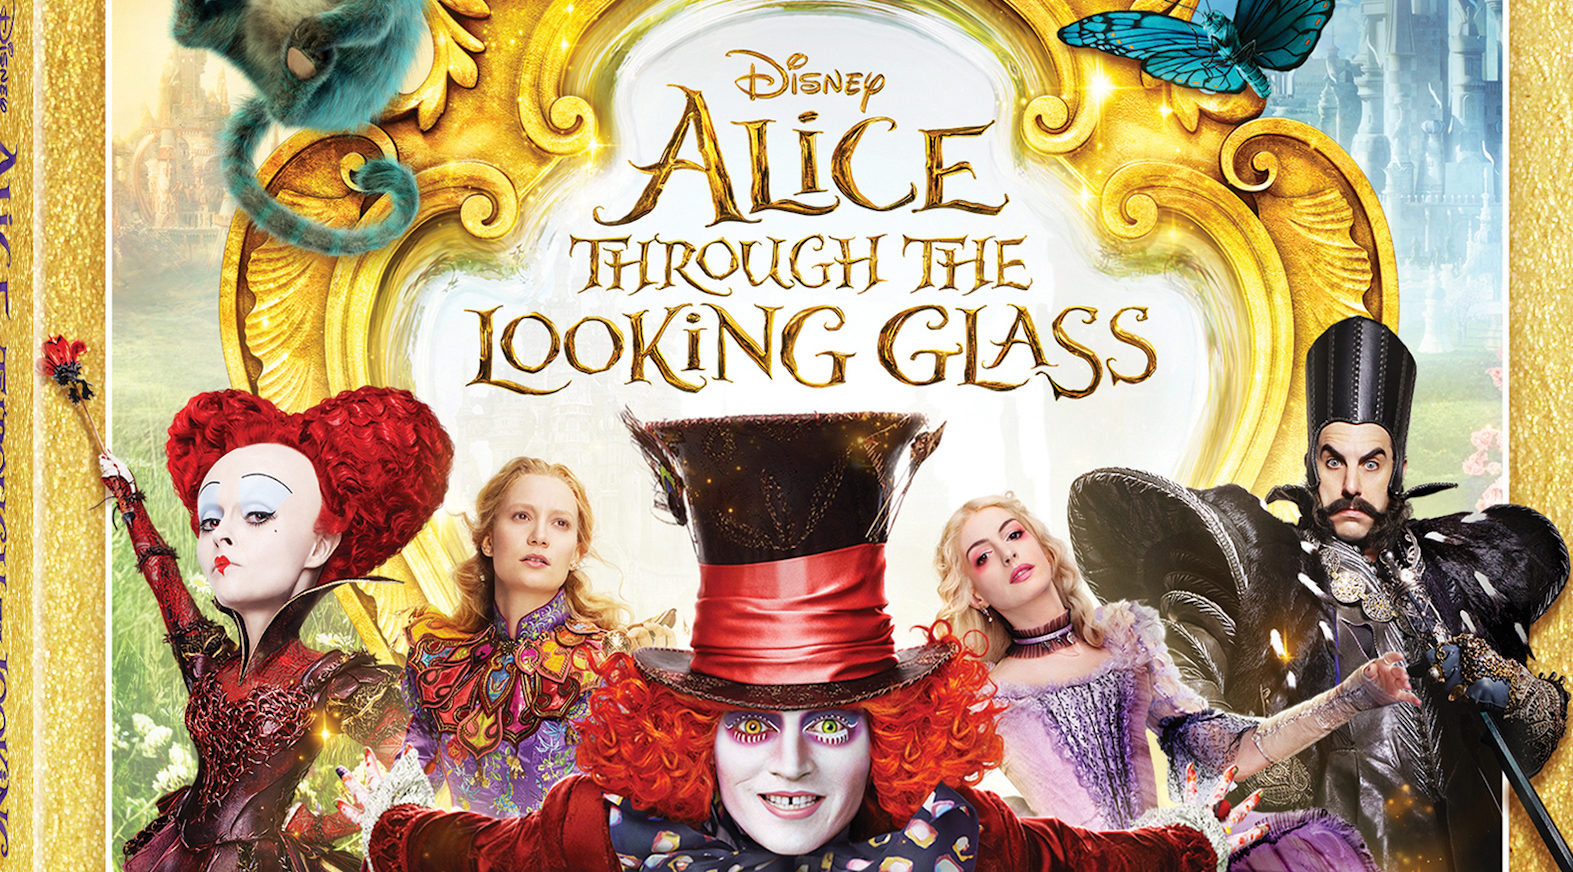 Through the looking glass book report